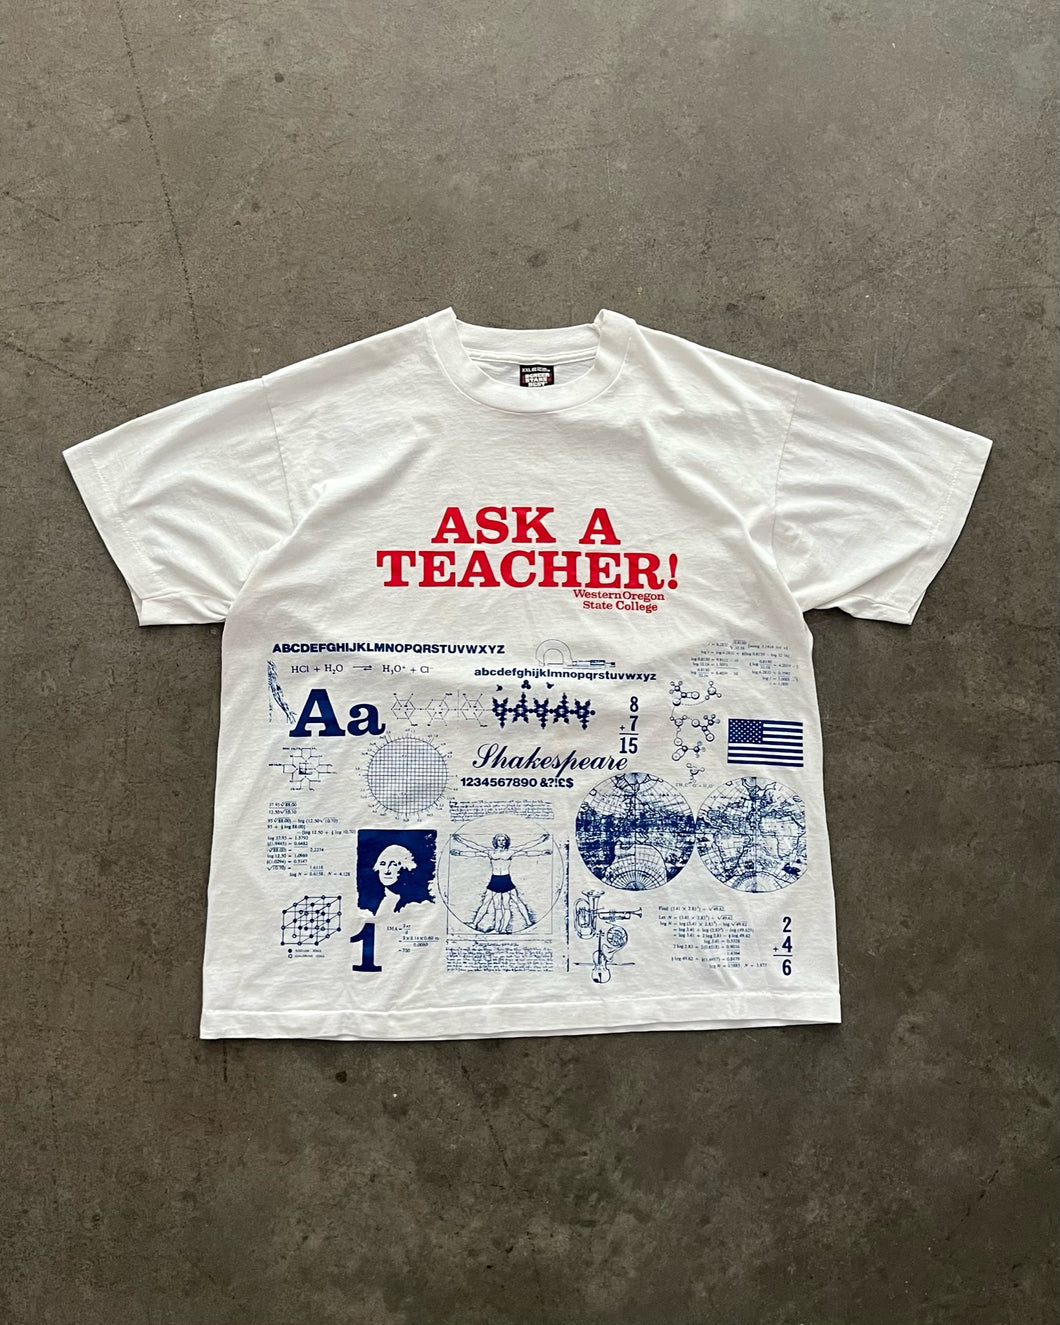 SINGLE STITCHED “ASK A TEACHER!” TEE - 1990S